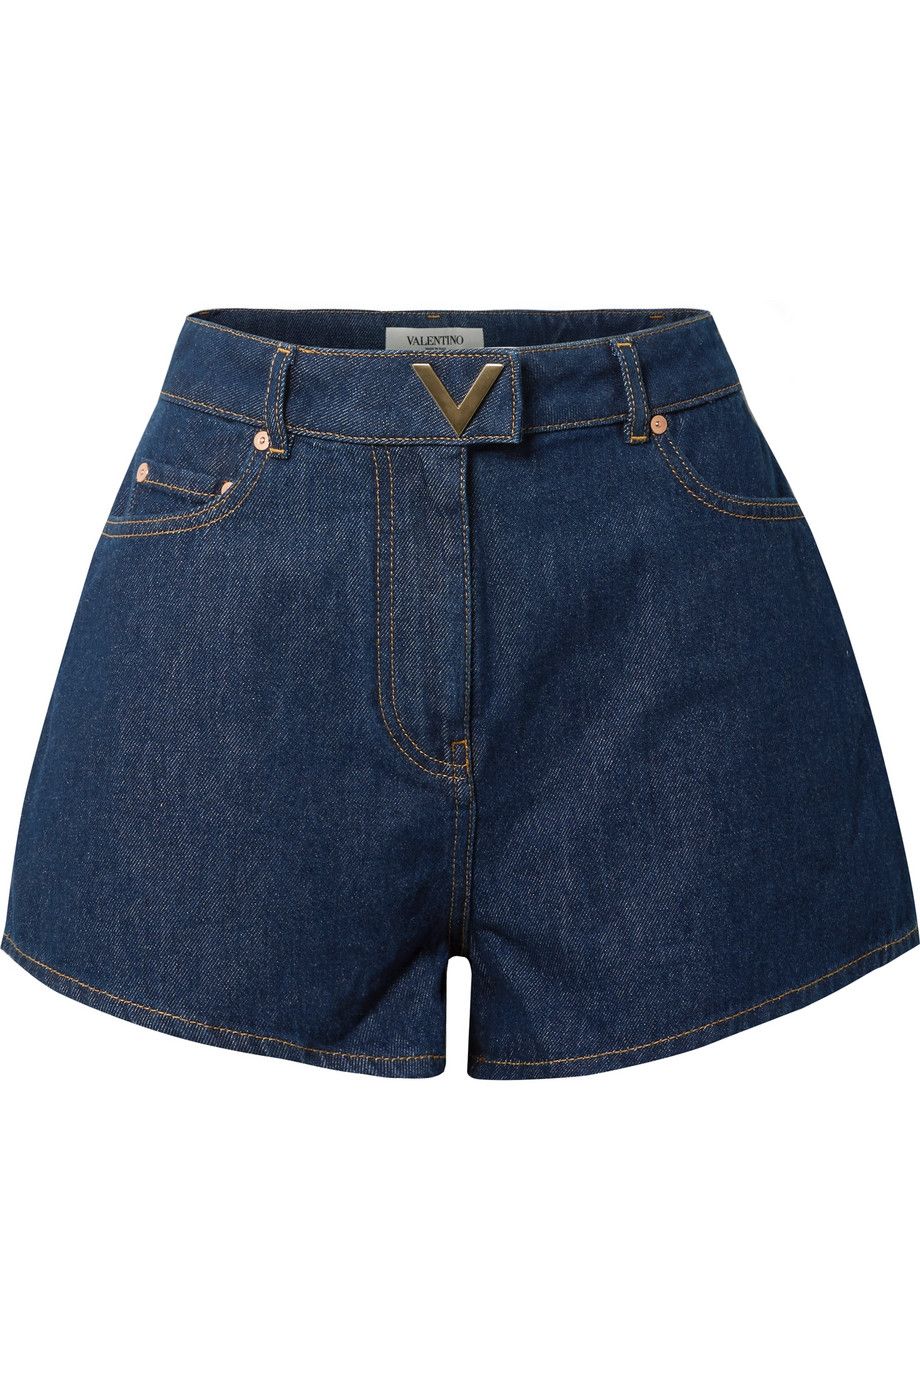 Y/Project Releases Denim Brief-Style Short Shorts & the Internet ...